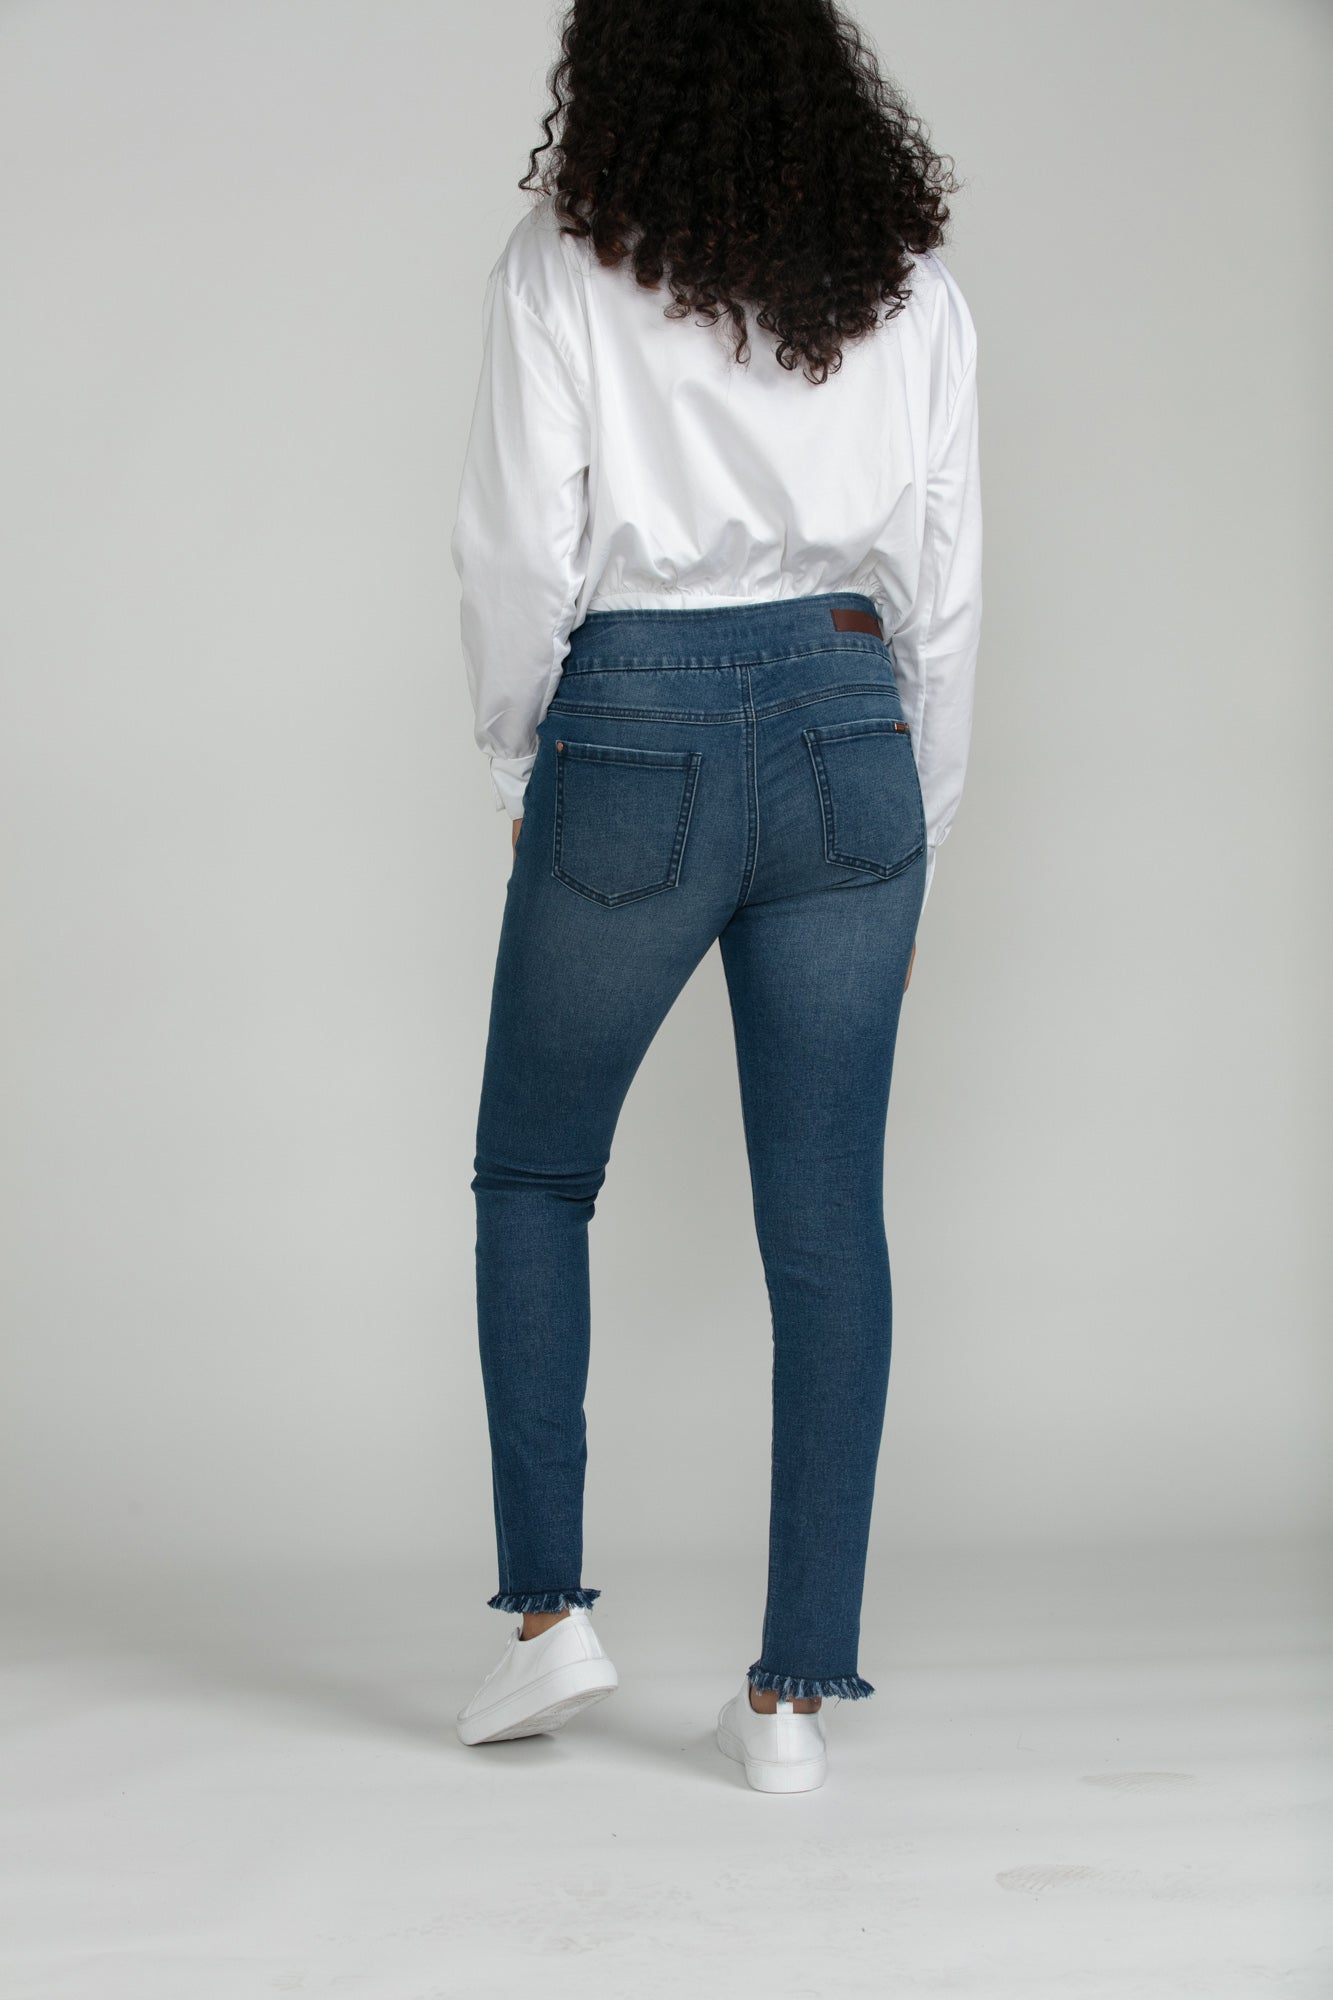 Bluberry Denim Pull-On Ankle Length Chole